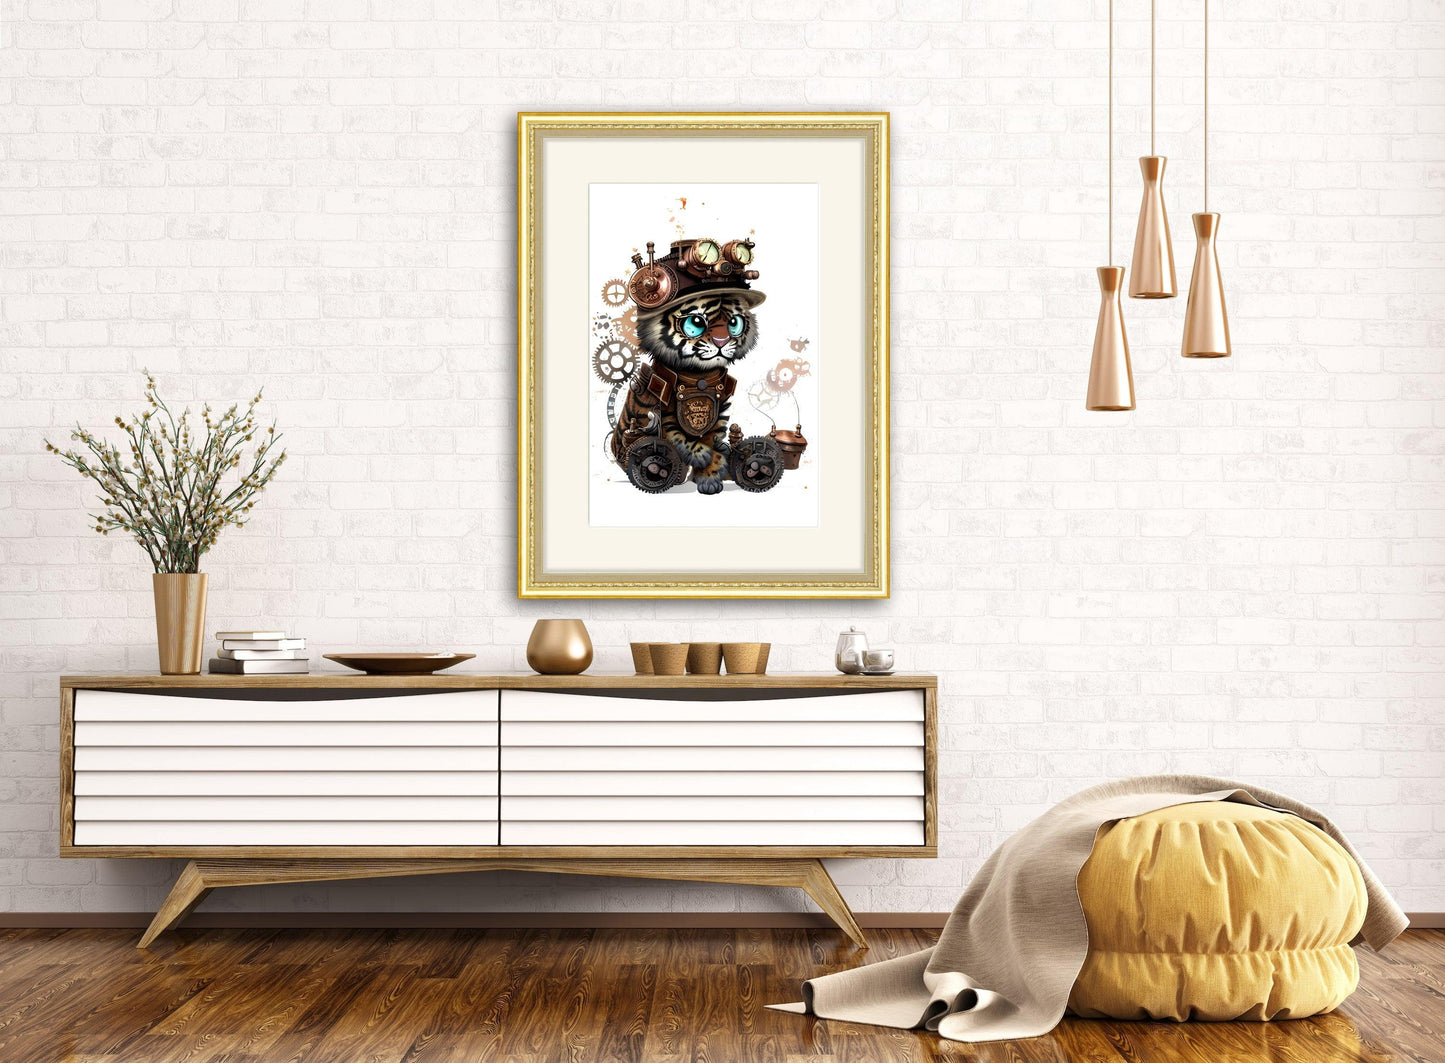 Tiger with Cogs - Steampunk Dictionary Art Print, Fine Art Print, Funny Animal, Perfect Gift, Whimsical Steampunk Tiger Collage Print - ArtCursor